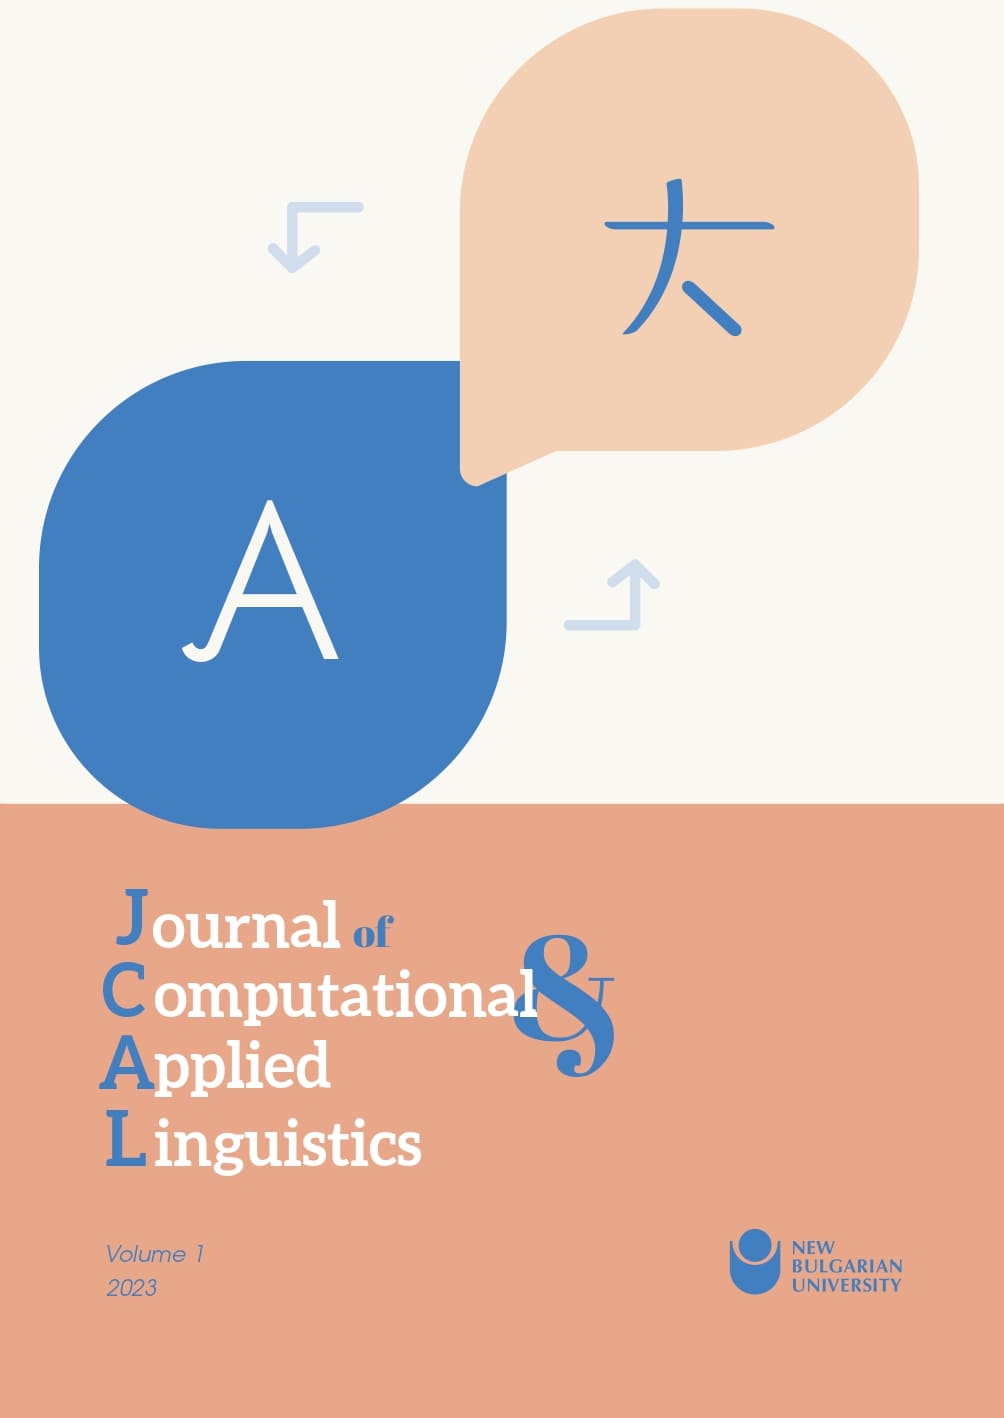 					View Vol. 1 (2023): Journal of Computational and Applied Linguistics
				